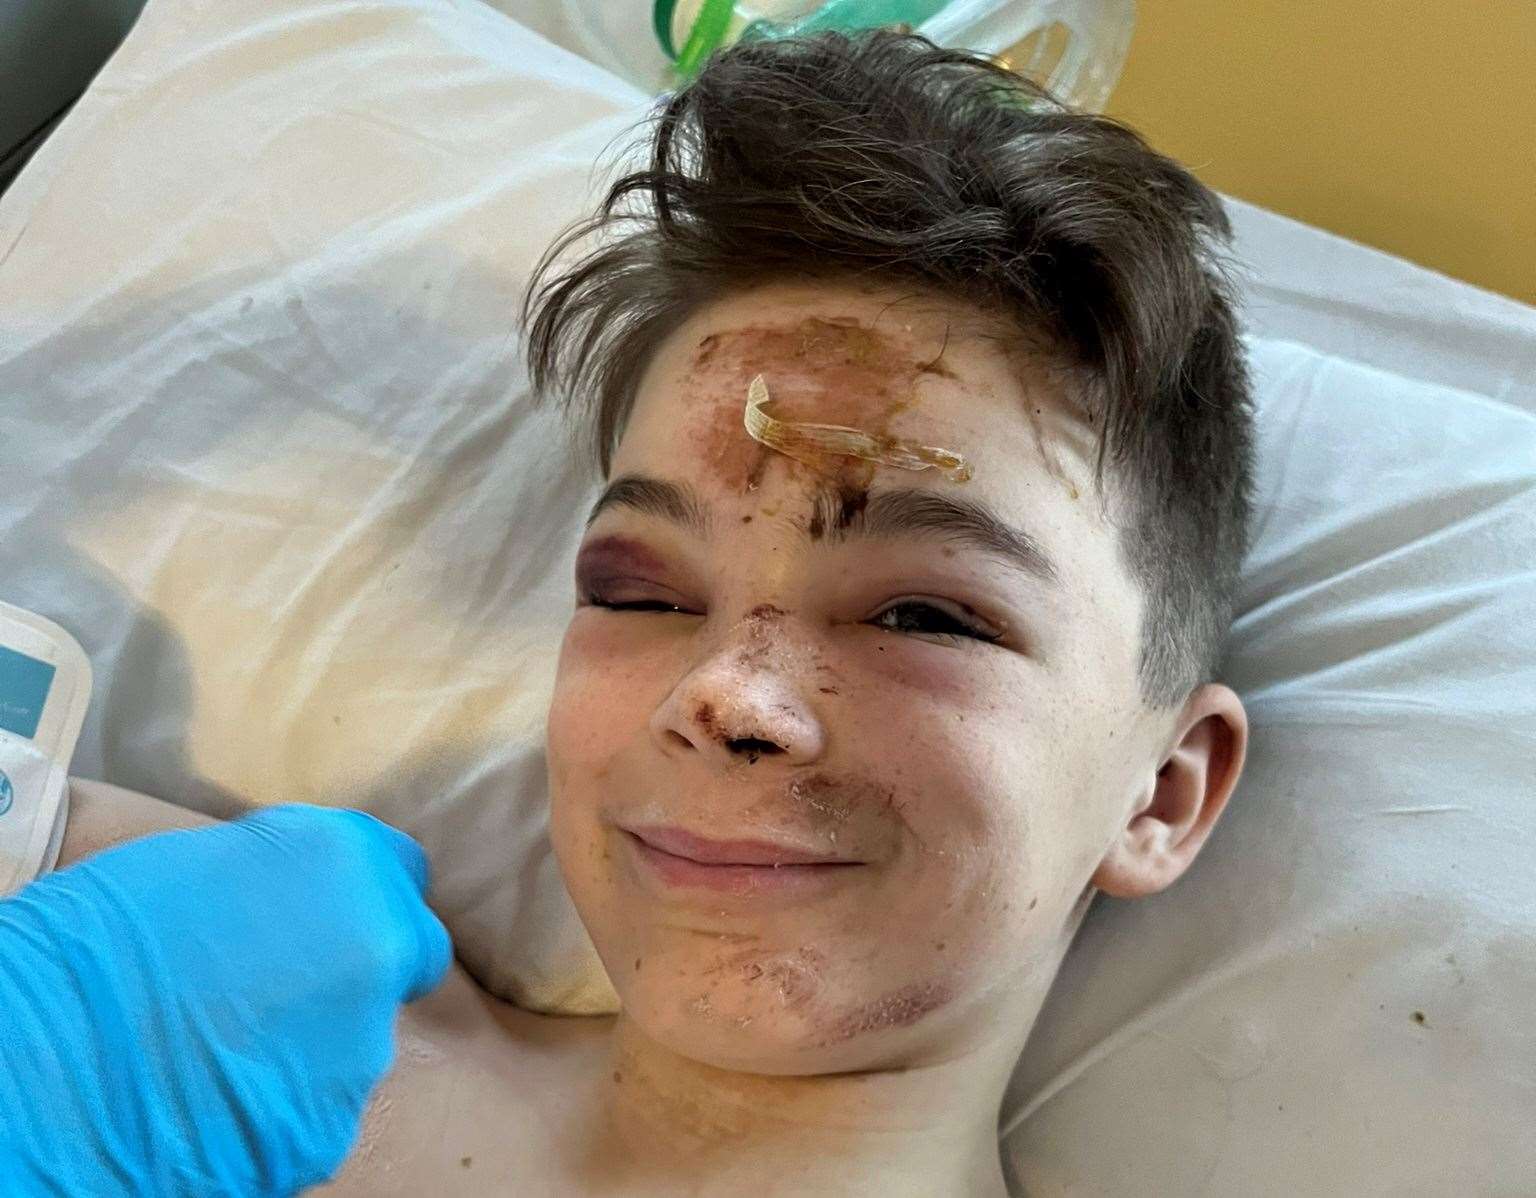 He suffered fractures to his skull, a brain bleed and broken bones. Picture: Ruth Hoy